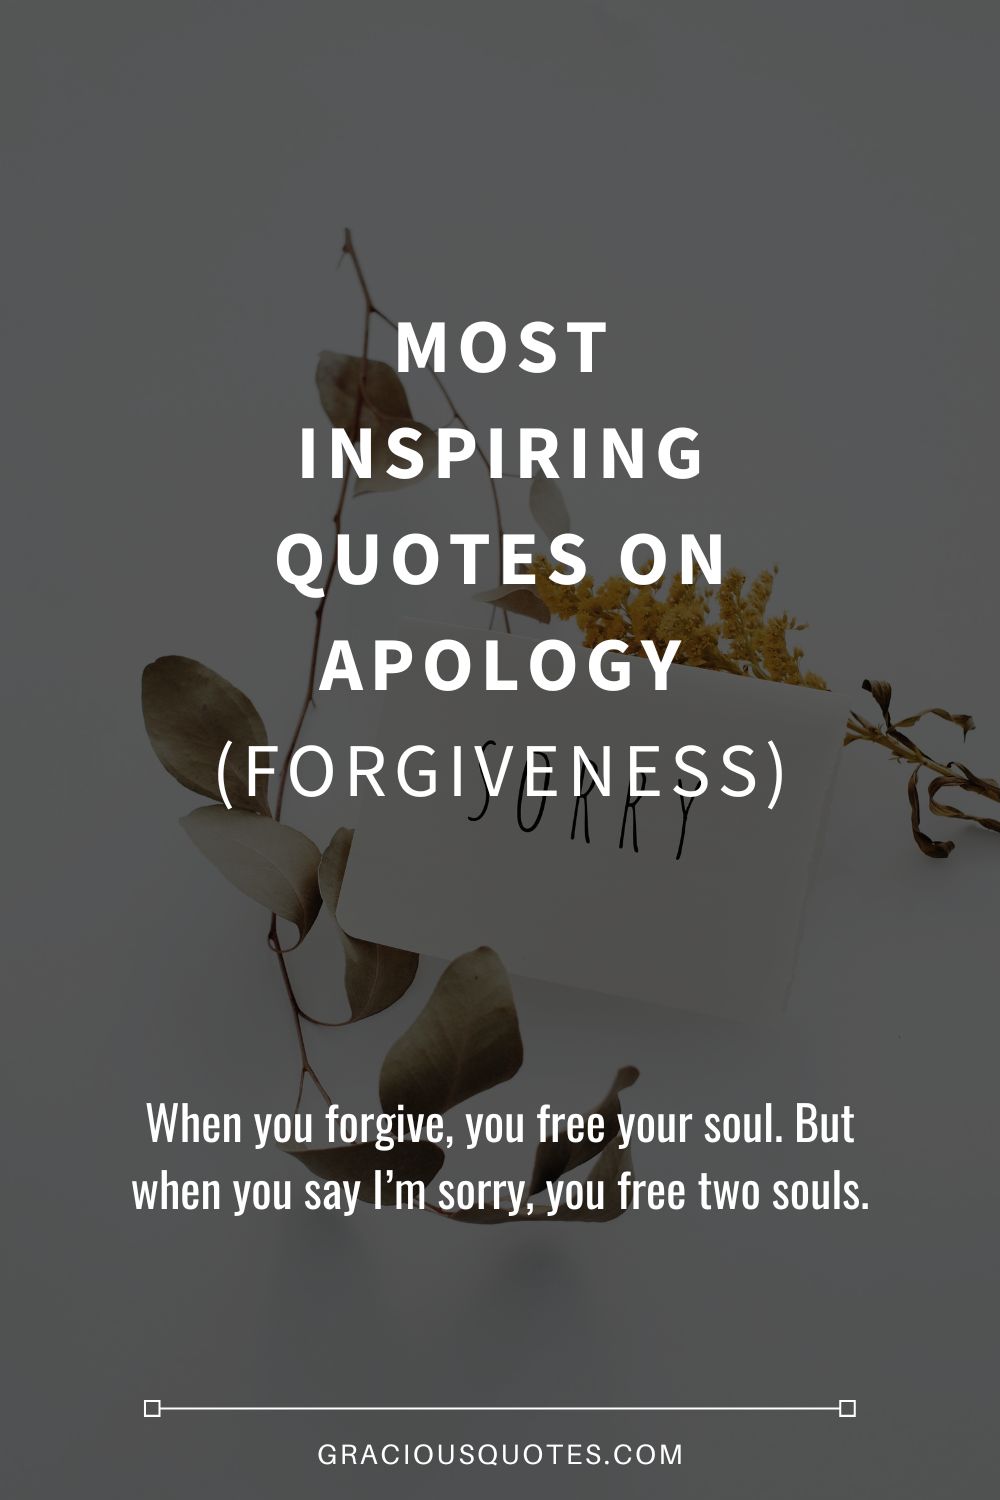 35 Sorry Love Quotes to Make a Heartfelt Apology